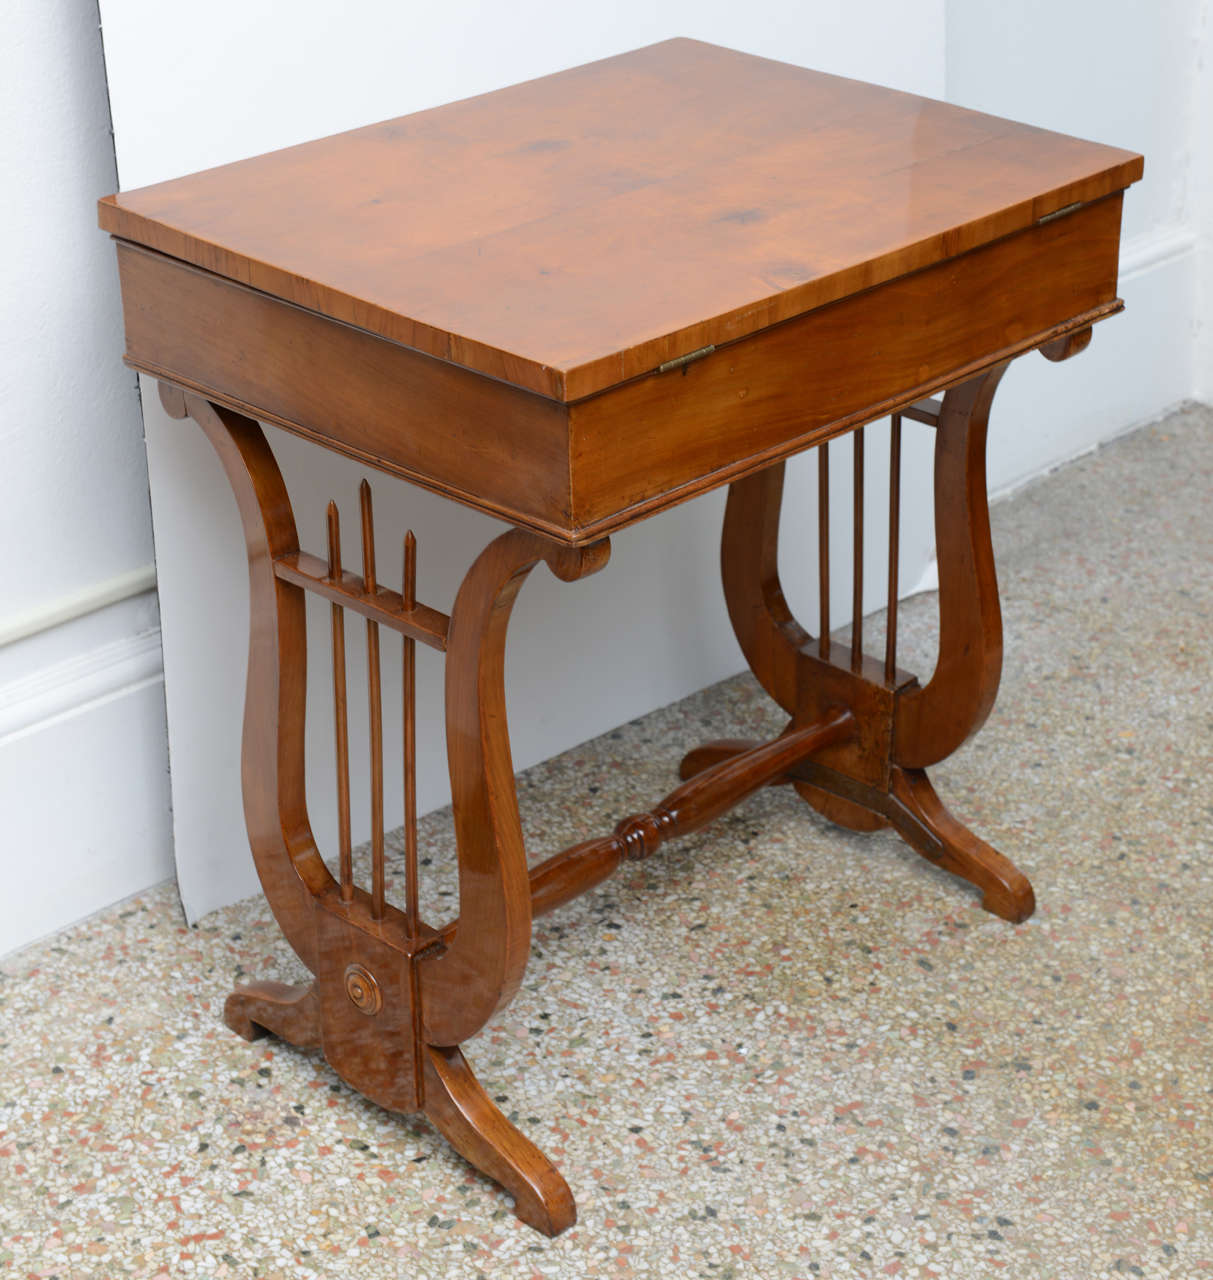 Antique Austrian Biedermeier Work Table with double lyre sides handcrafted in sherrywood with ebony & hinged top with compartments interior

Originally $ 5,800.00

In Central Europe, the Biedermeier era refers to the middle-class sensibilities